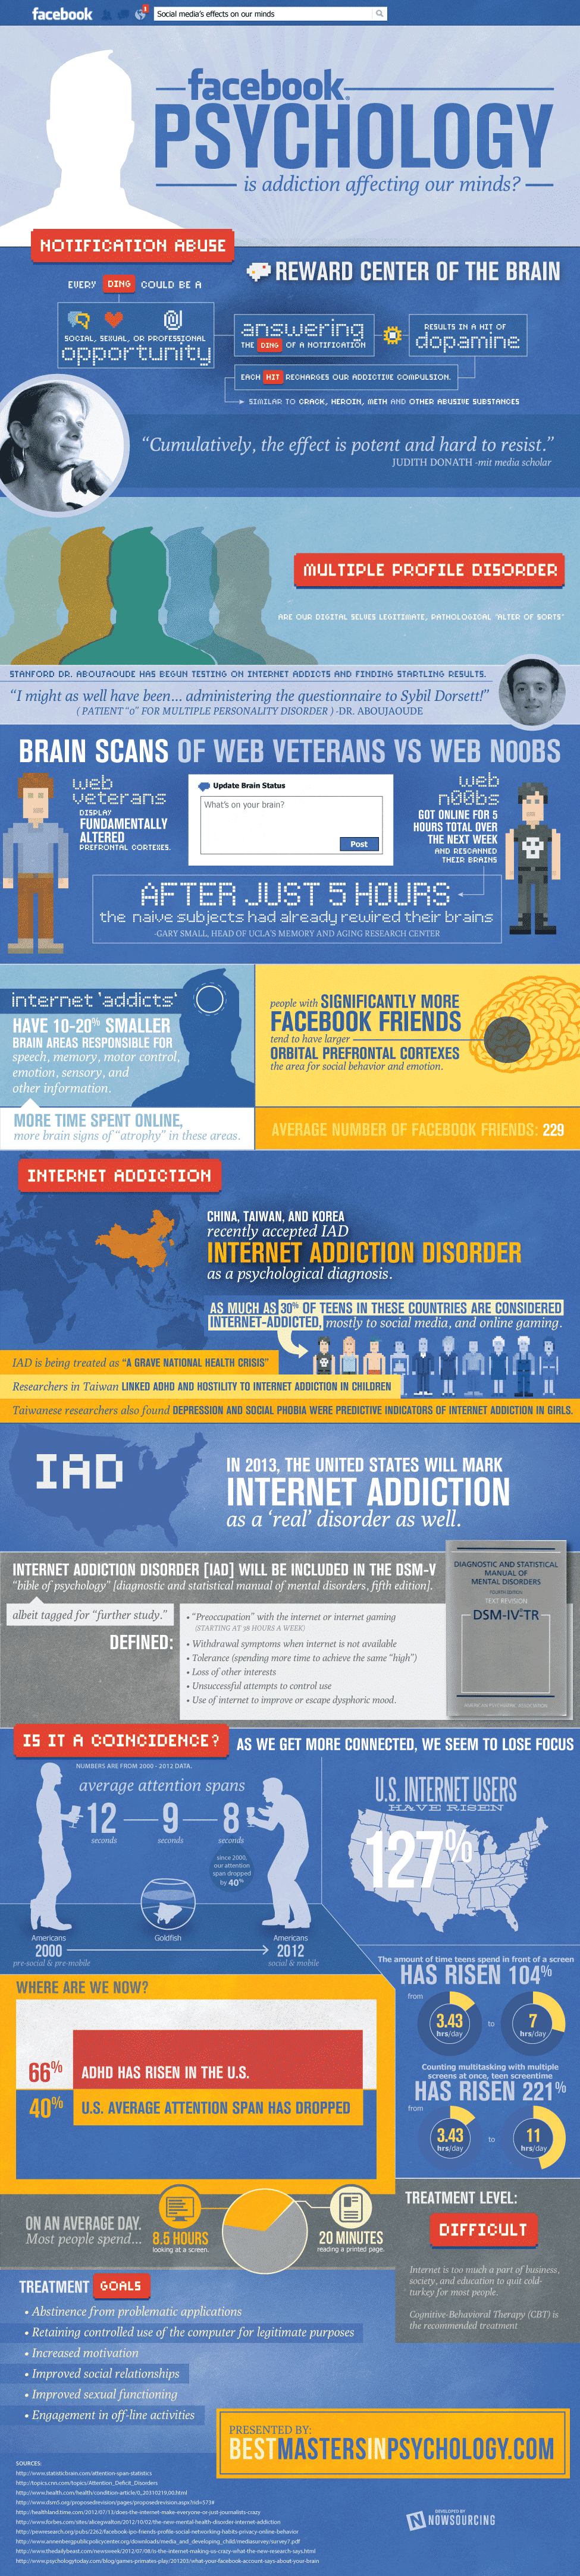 The Mental Effects Of Facebook Addiction [Infographic]